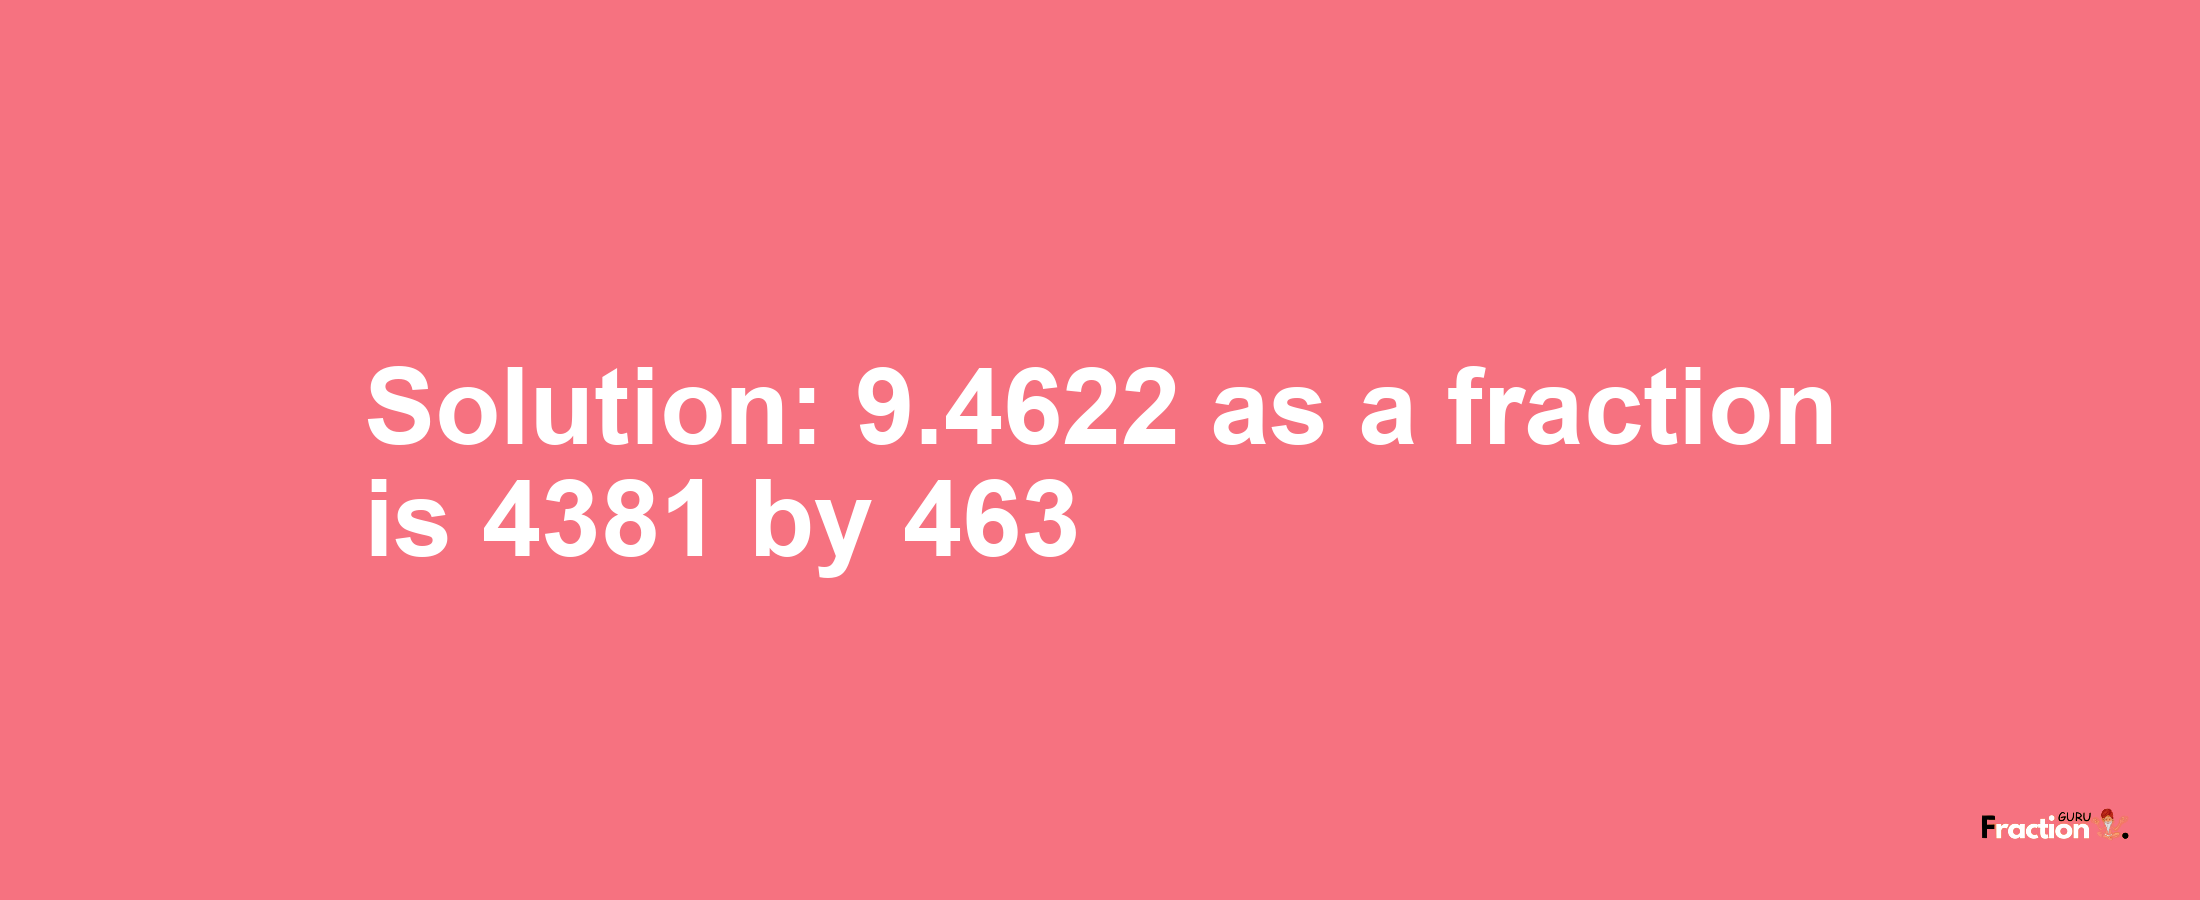 Solution:9.4622 as a fraction is 4381/463